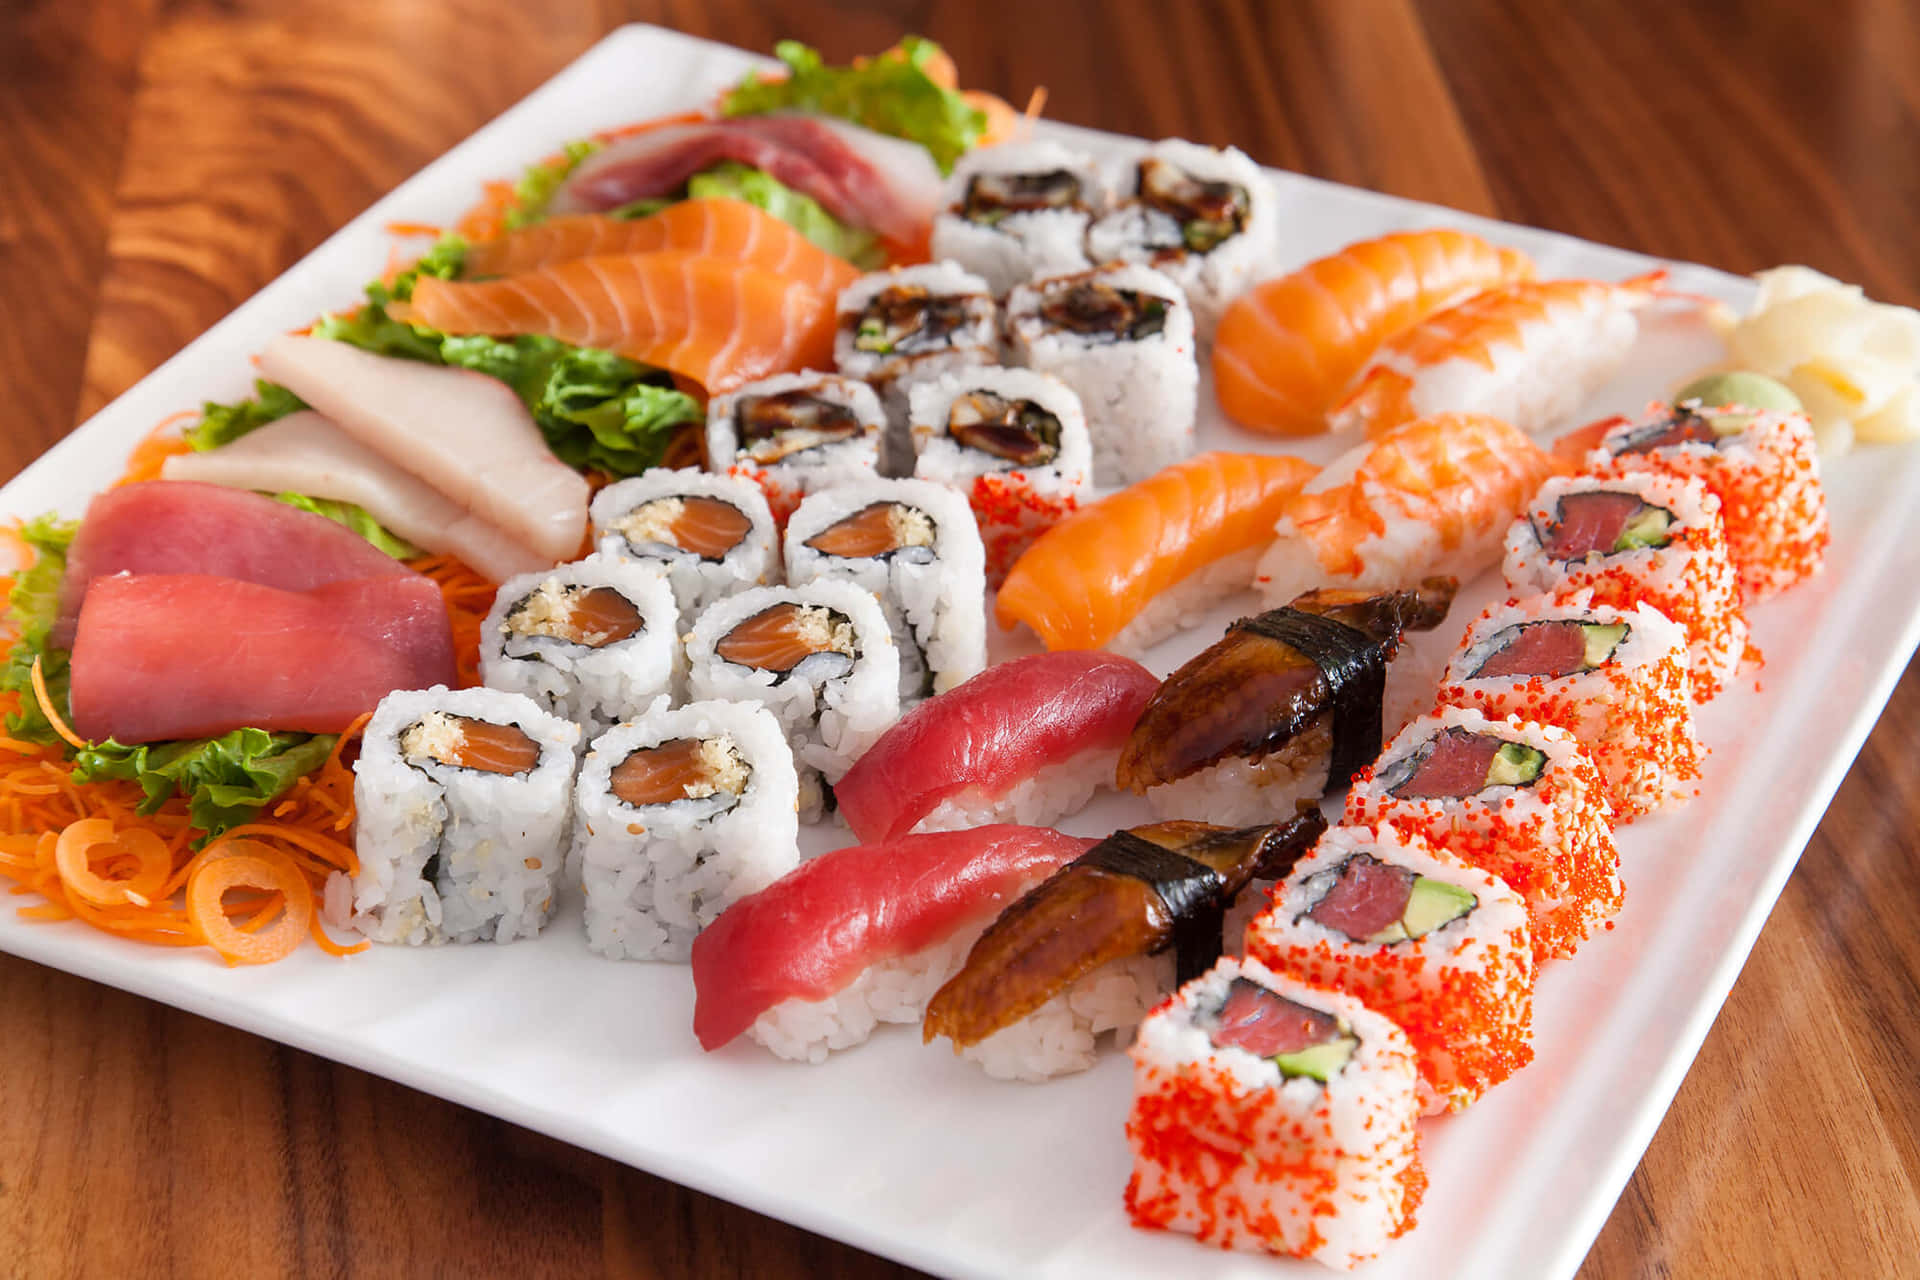 An assortement of sushi and maki rolls, sushi rolls and Japanese delights